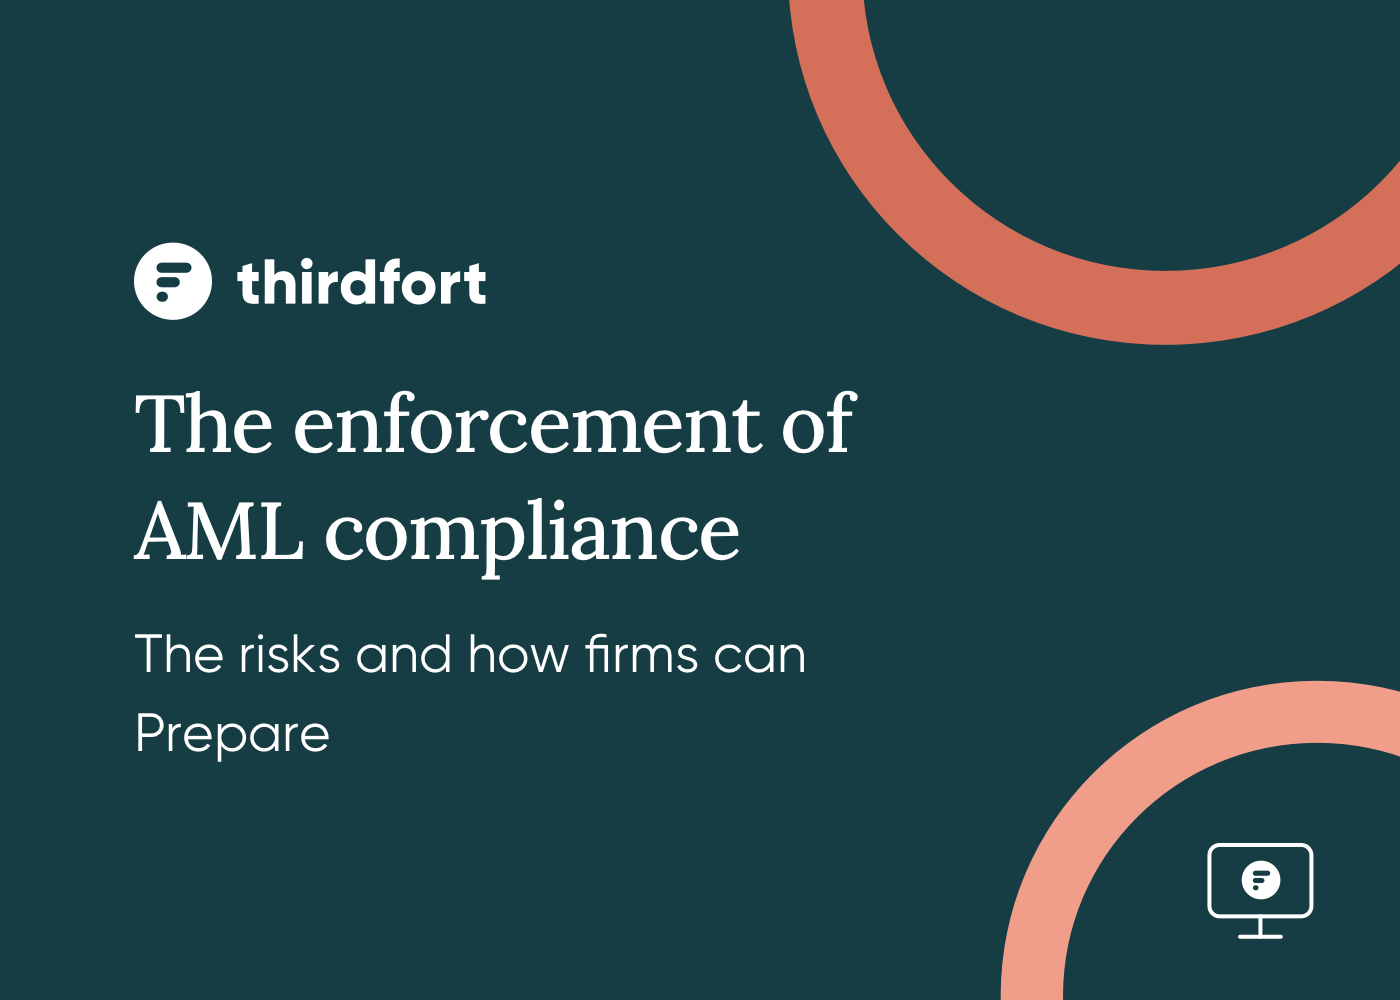 A Thirdfort webinar with title "The enforcement of AML compliance"